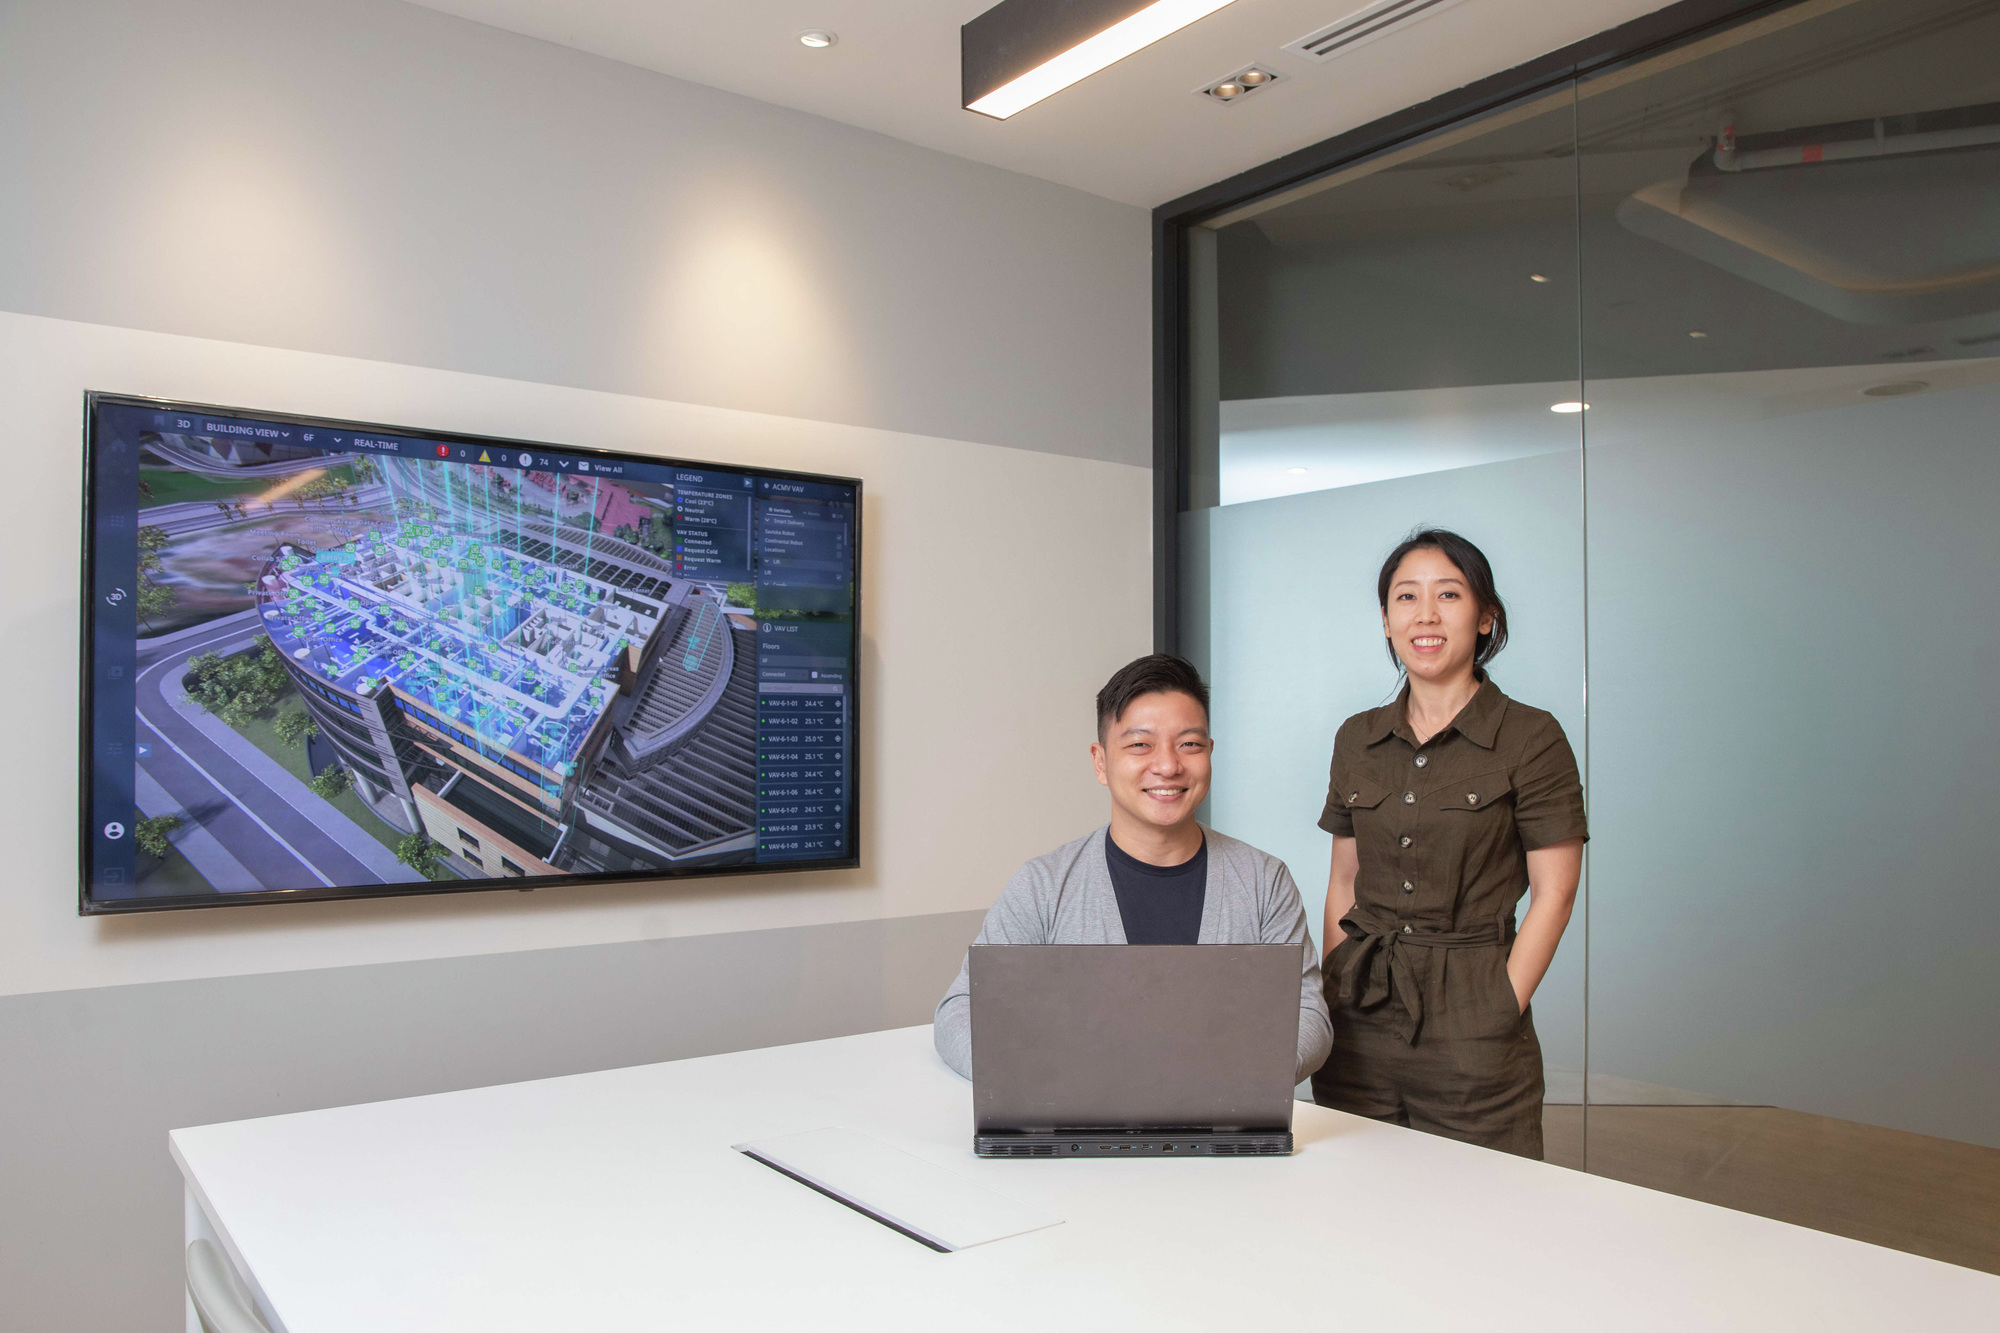 Alan Tan, senior manager and systems team Lead, and Hazel Jung, software engineer, share more about the ODP's digital twin technology